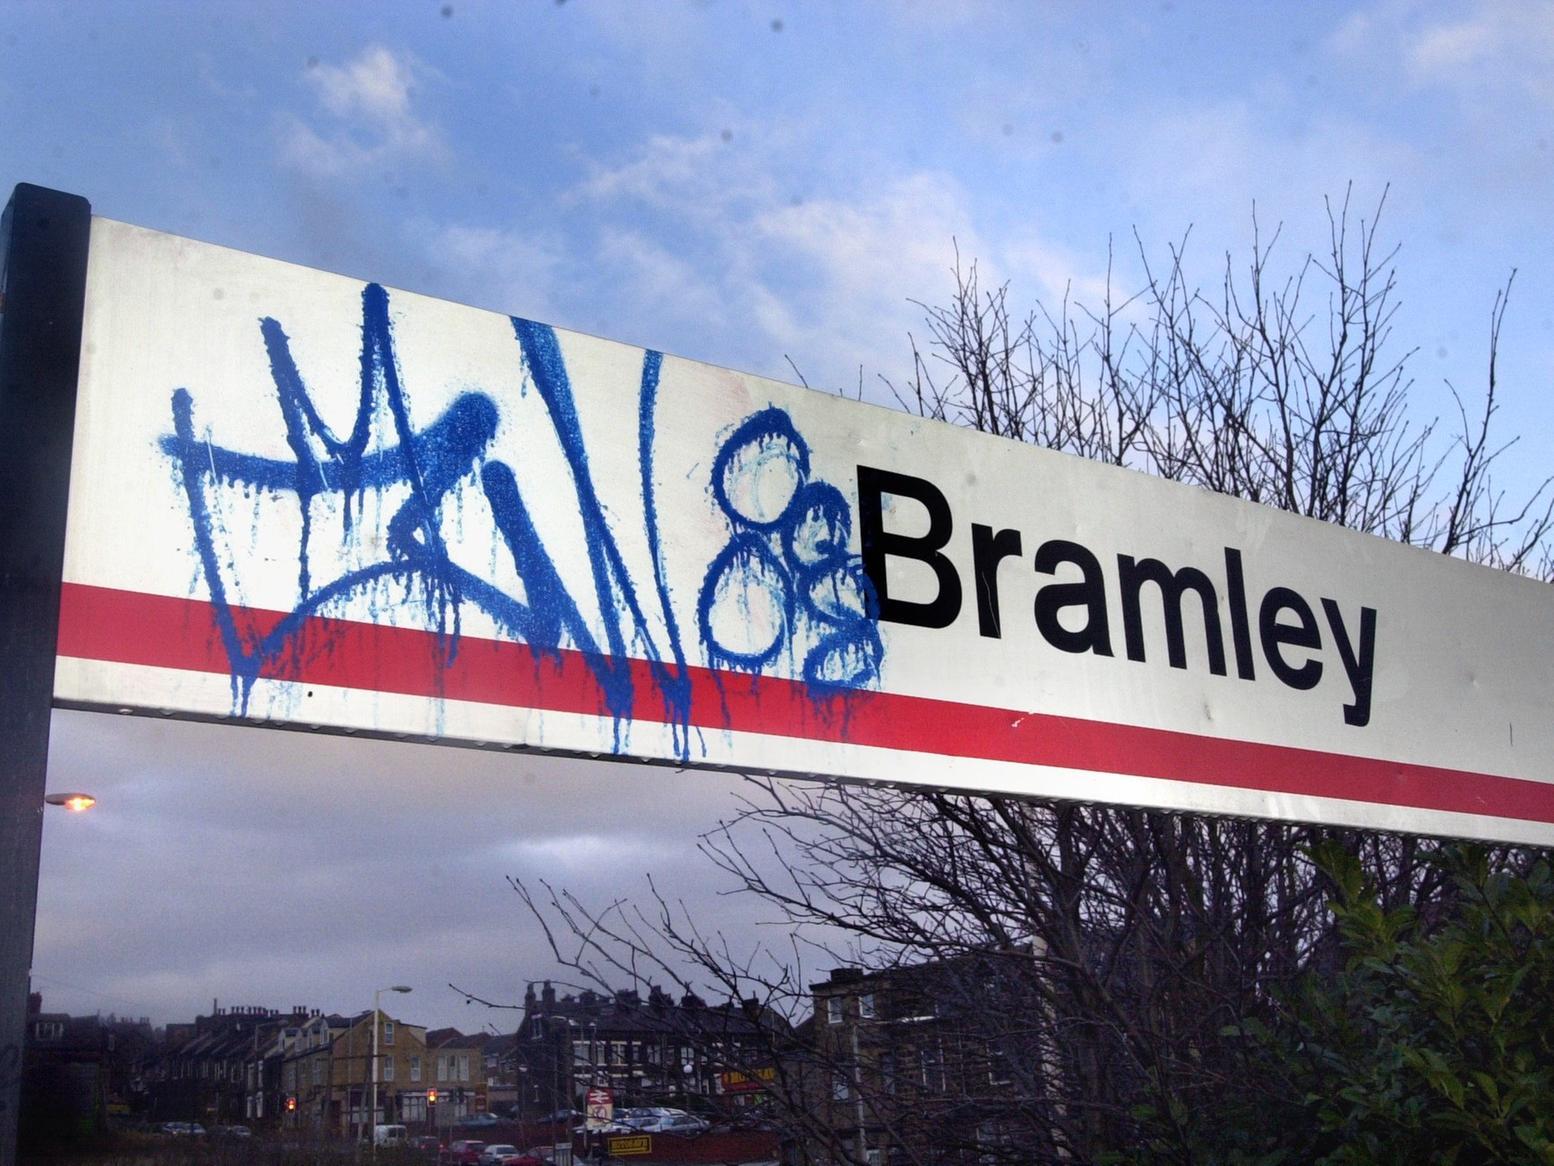 59 reports of anti-social behaviour in Bramley and the surrounding area during September 2019